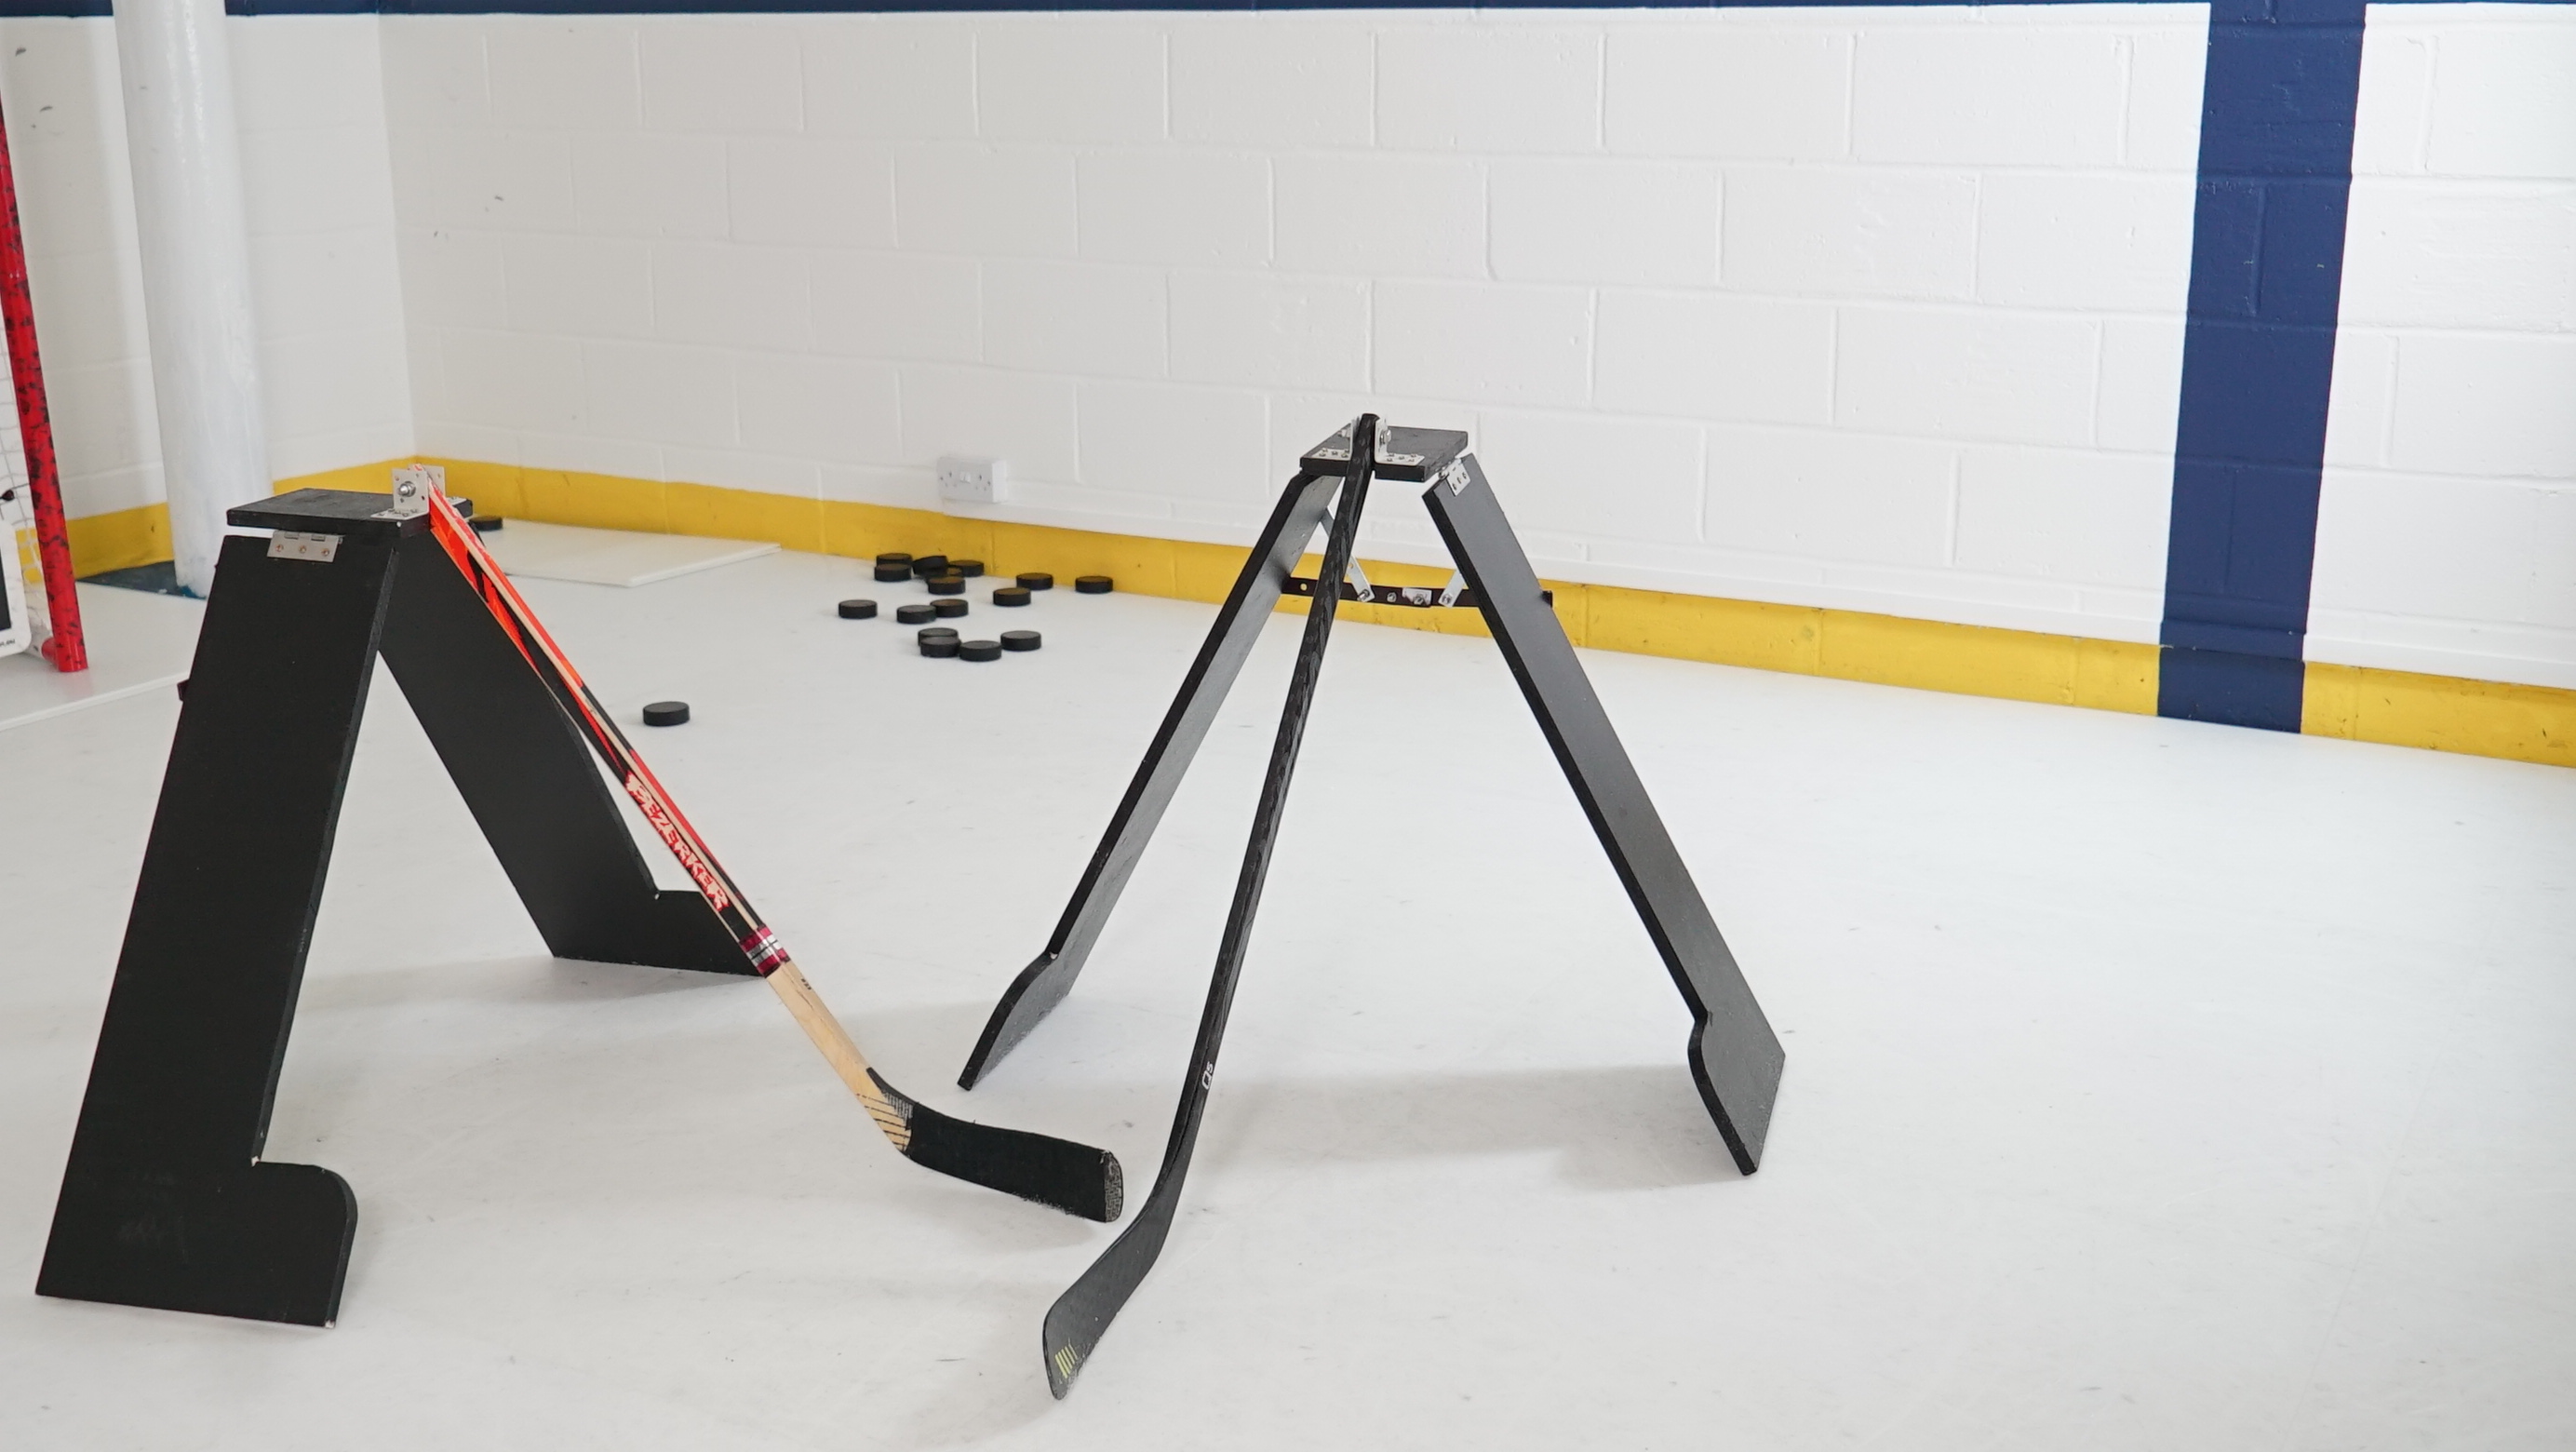 Expensive Hockey Training aid for CHEAP! Make DYI defender Attack